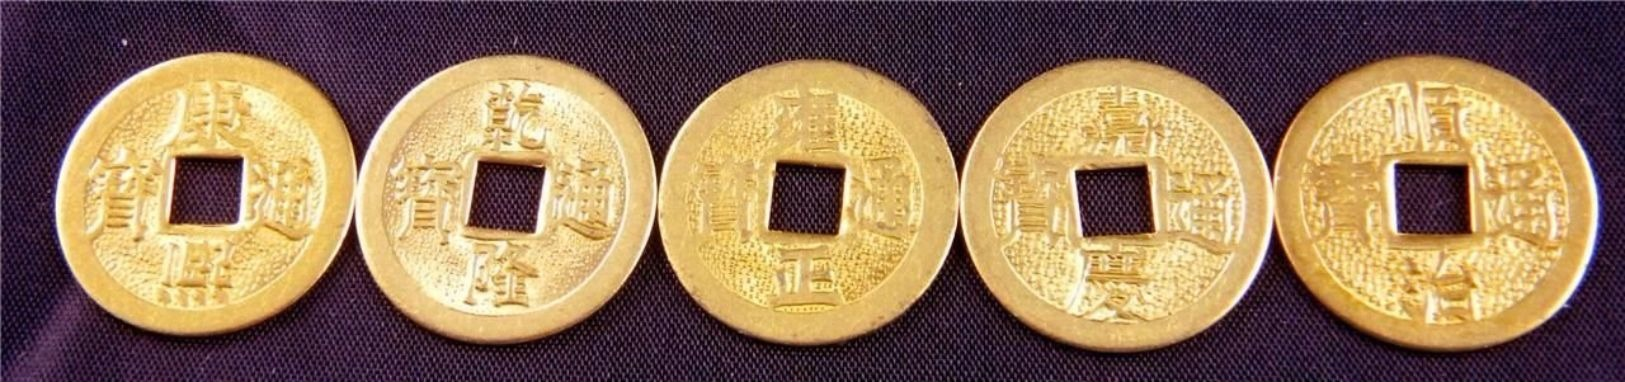 5 Chinese Five Emperor Fortune Feng Shui Gold Coin For Wealth And Success - China